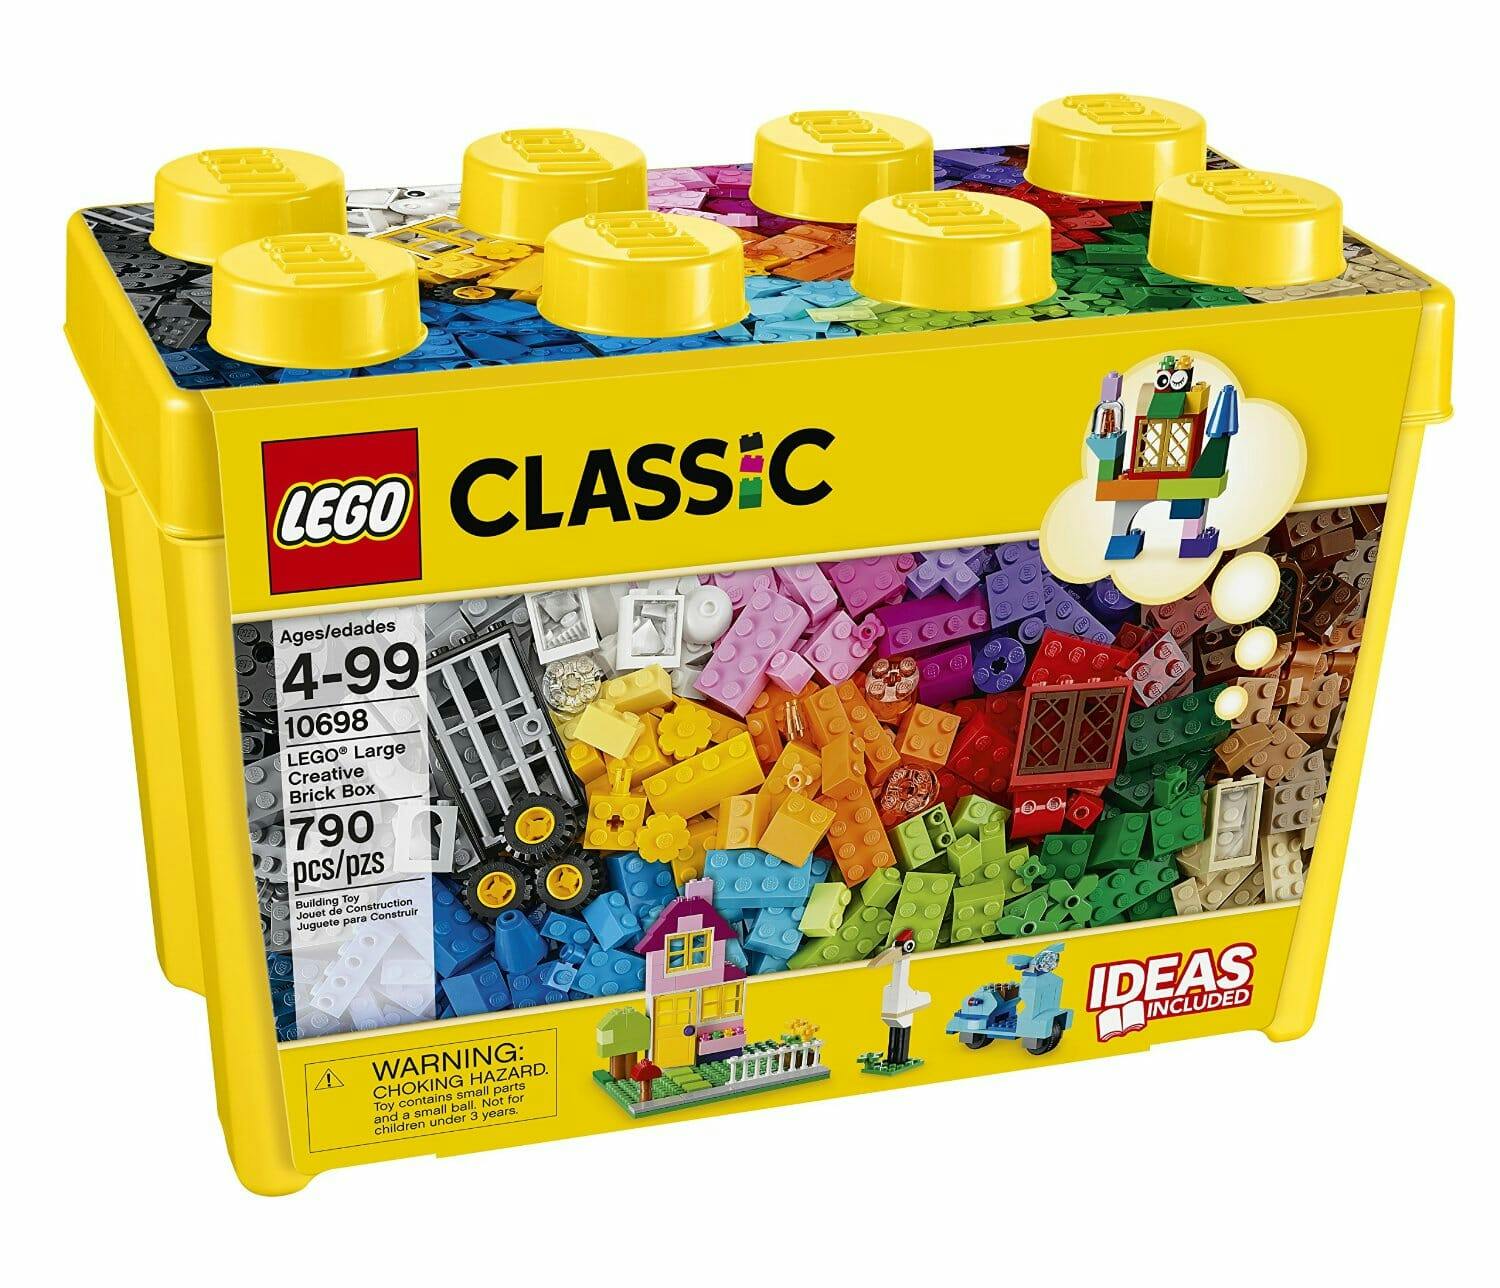 Lego for Girls: The 11 Best Lego Sets for Girls to Start Building